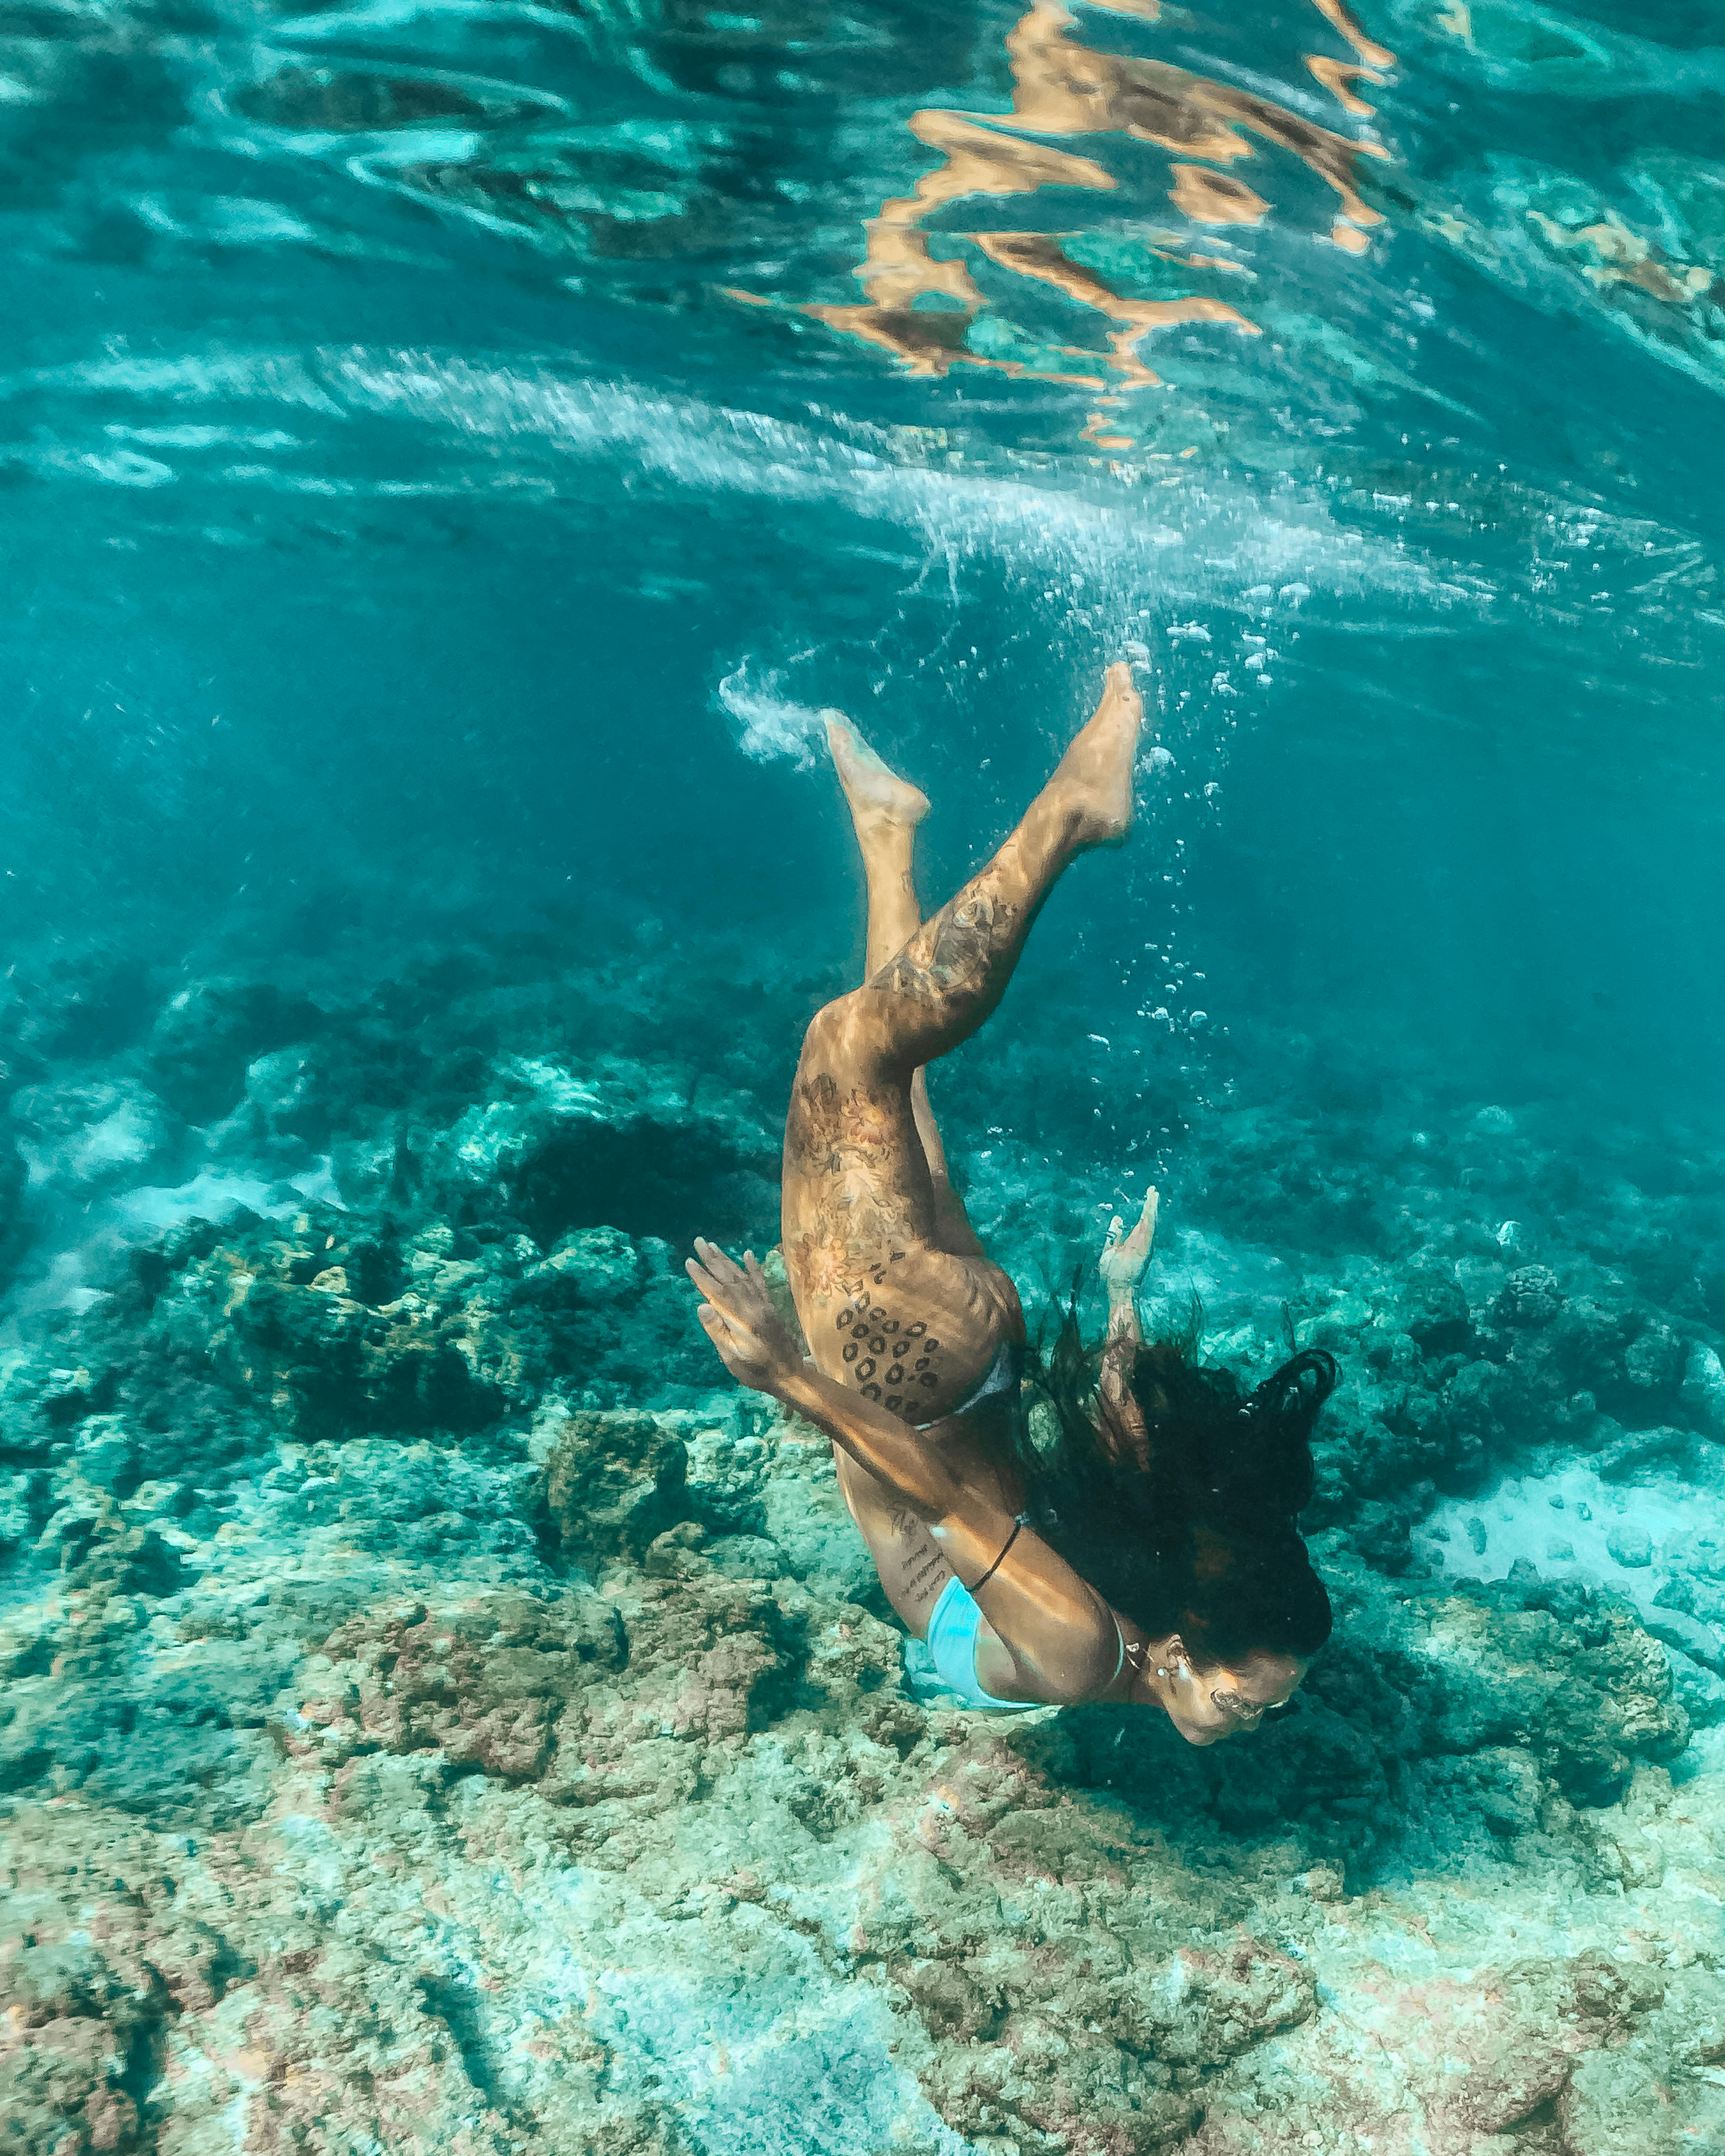 My Life as a Freediving Spearfisher - Lauren Sarasua